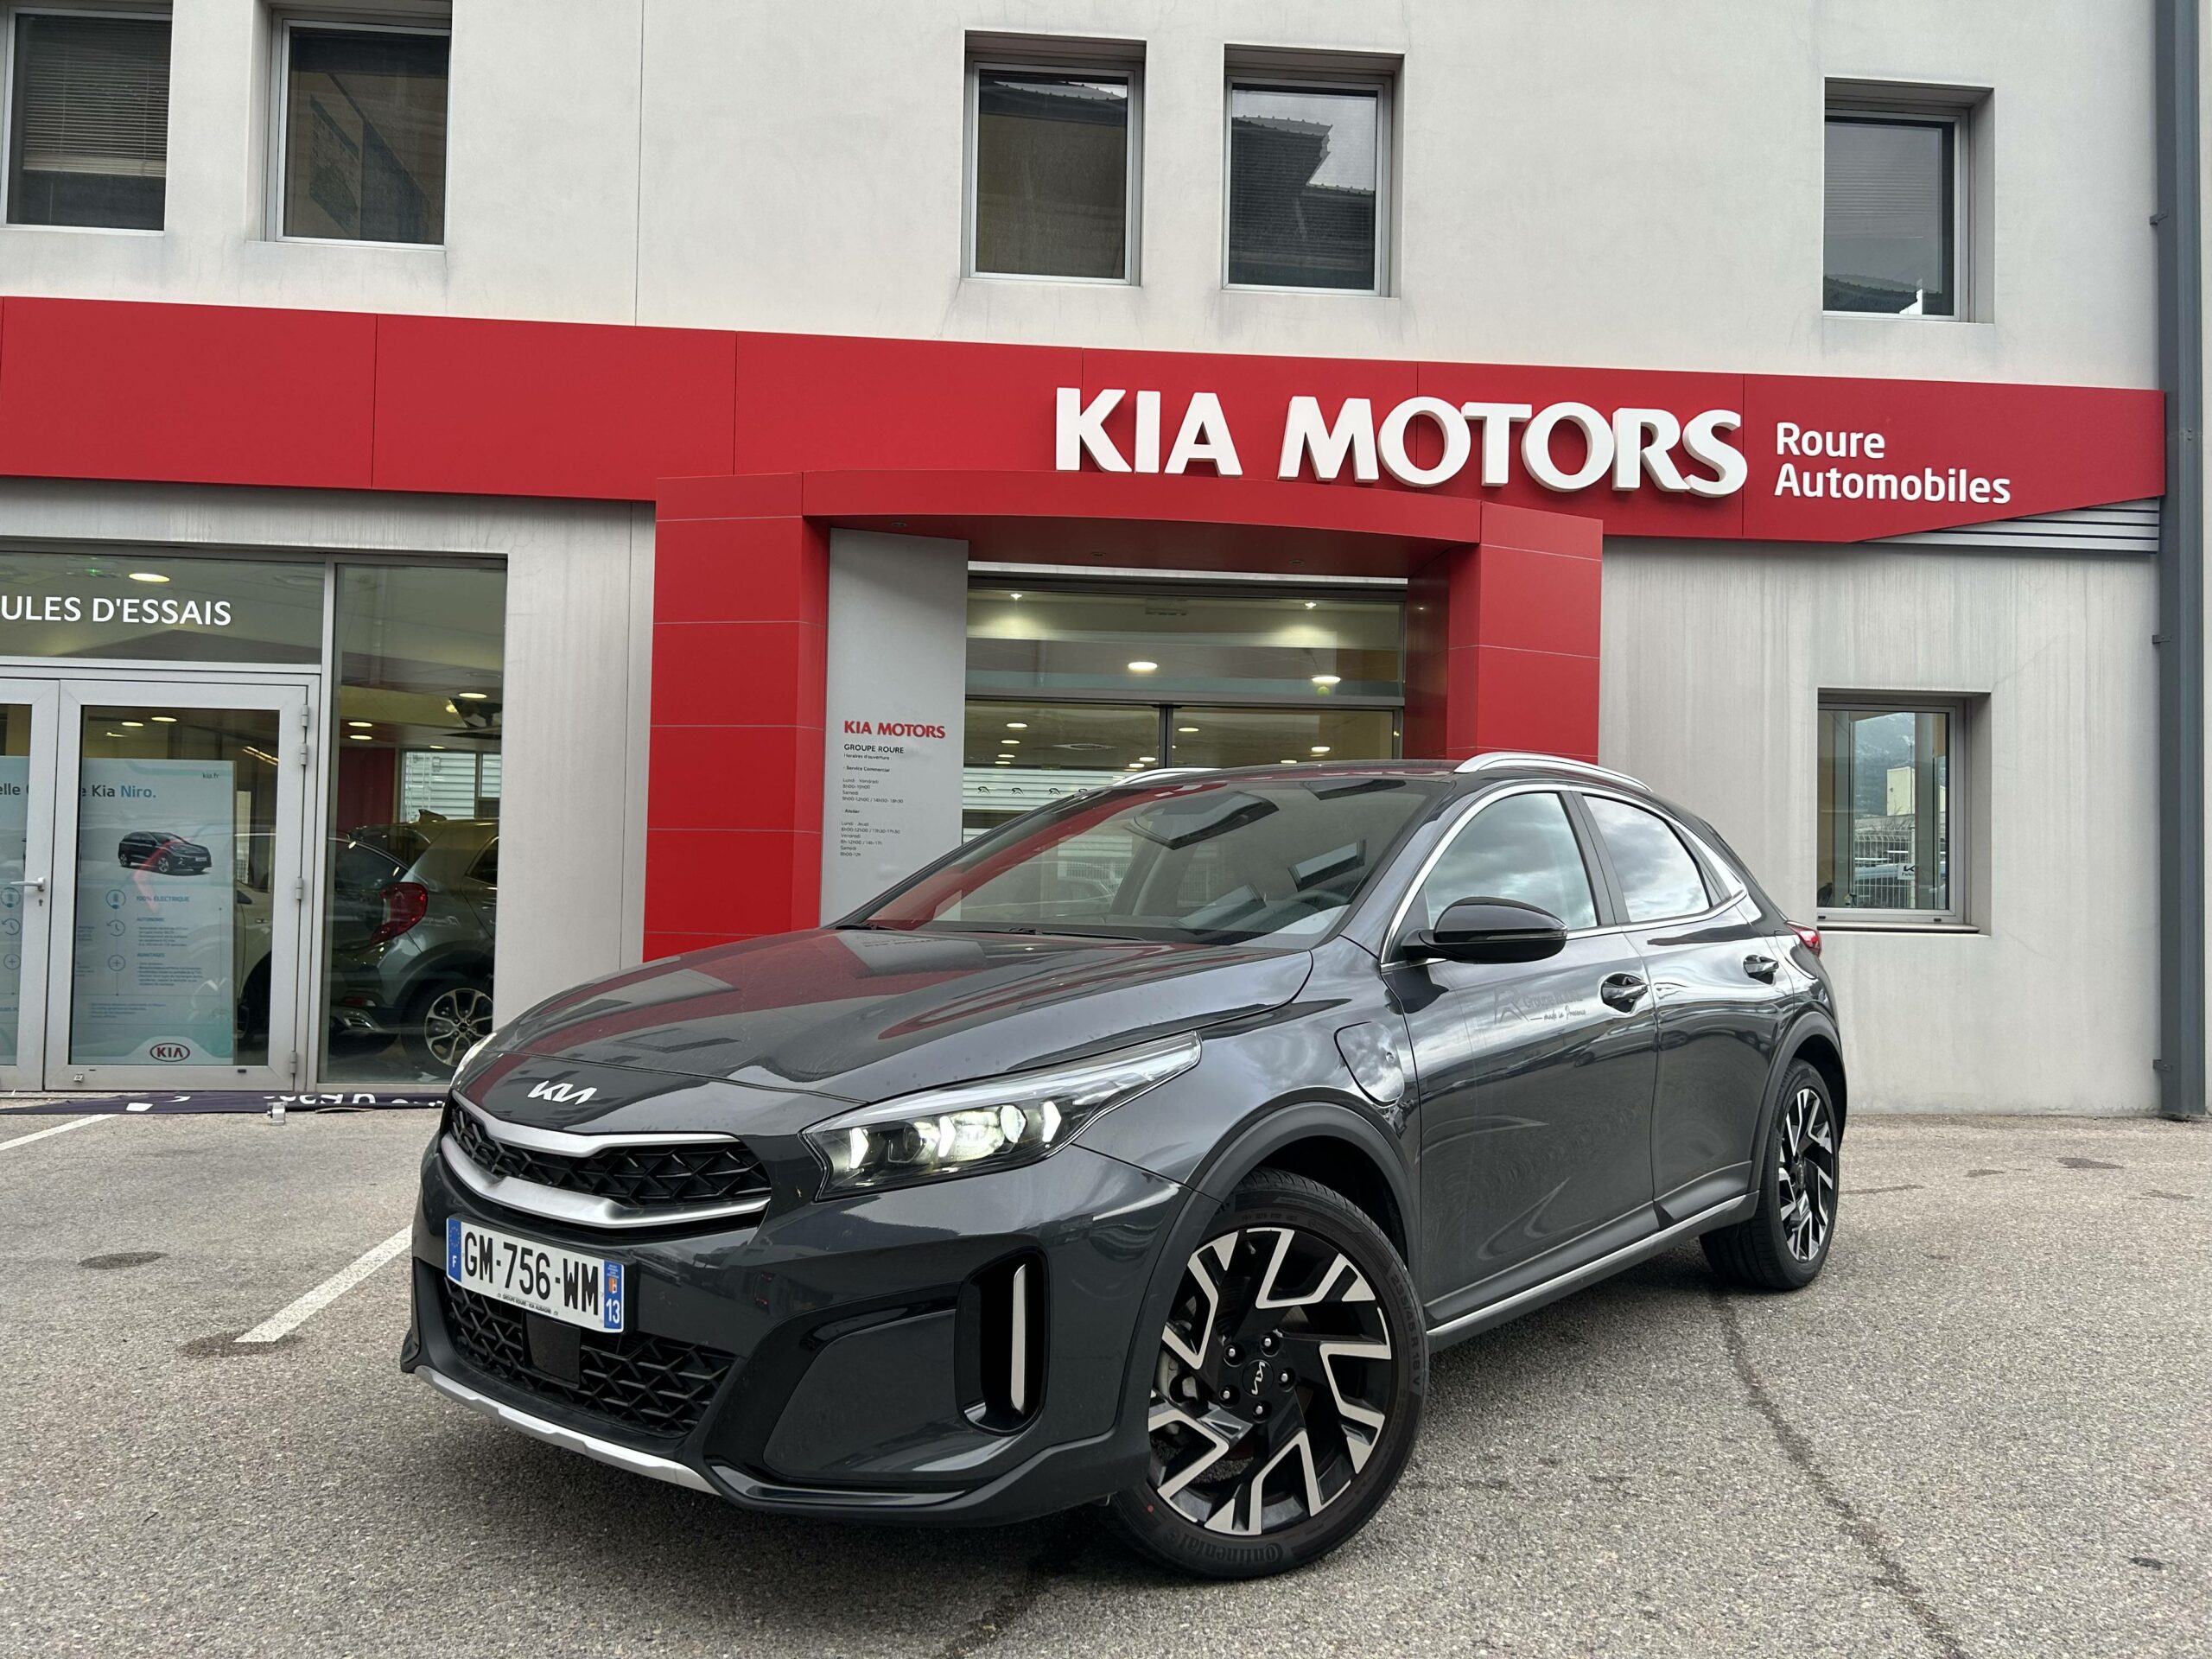 KIA-XCEED-XCeed 1.6 GDi PHEV 141ch DCT6-Lounge-32290-6000-roure-automobiles